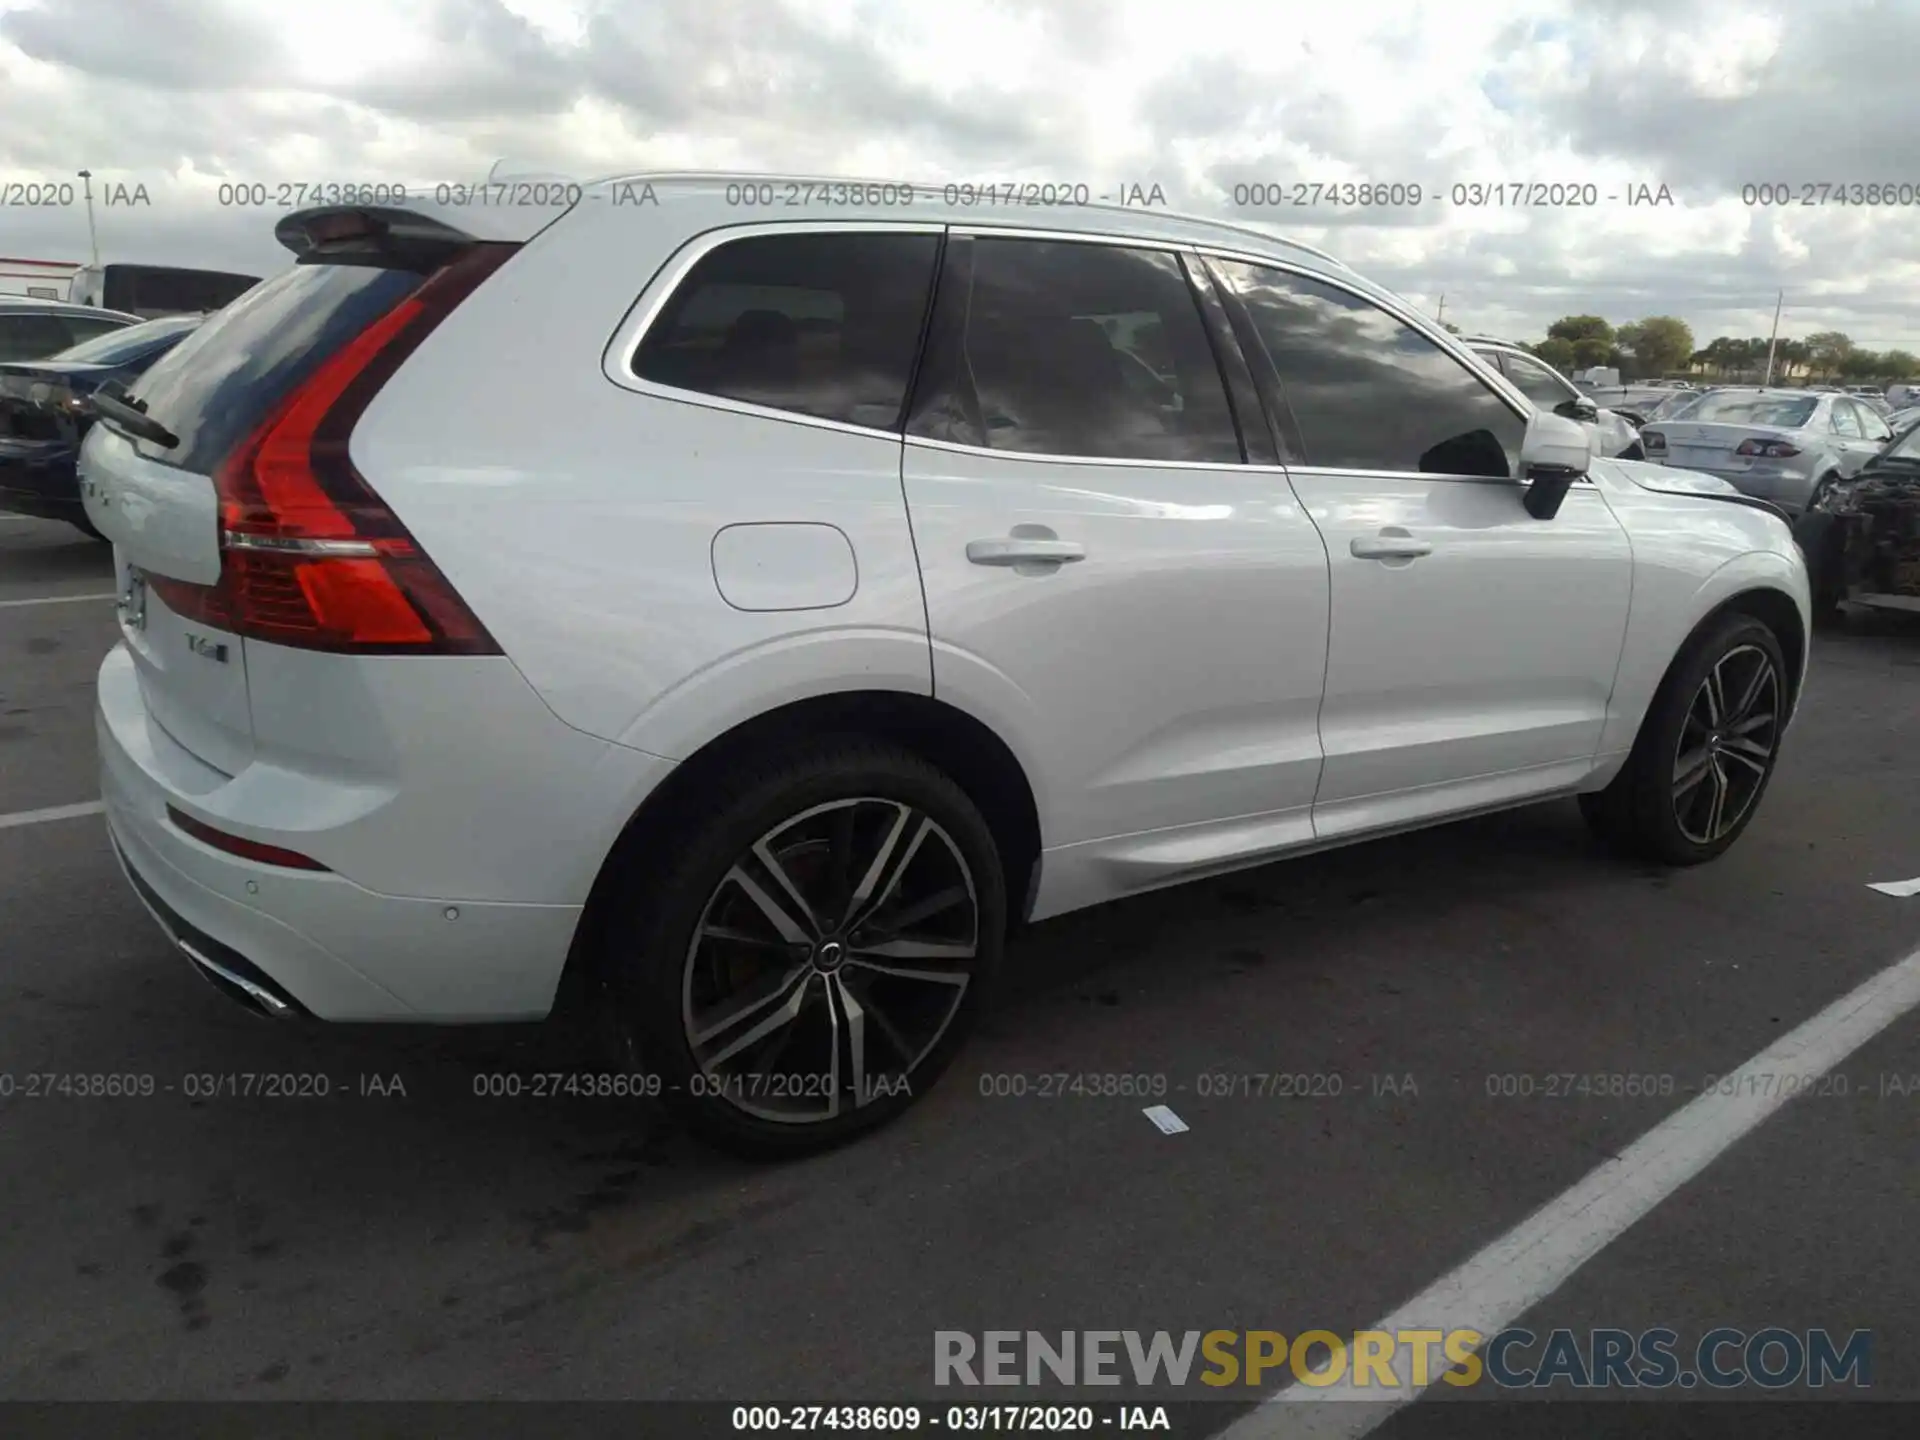 4 Photograph of a damaged car YV4A22RM1K1378967 VOLVO XC60 2019